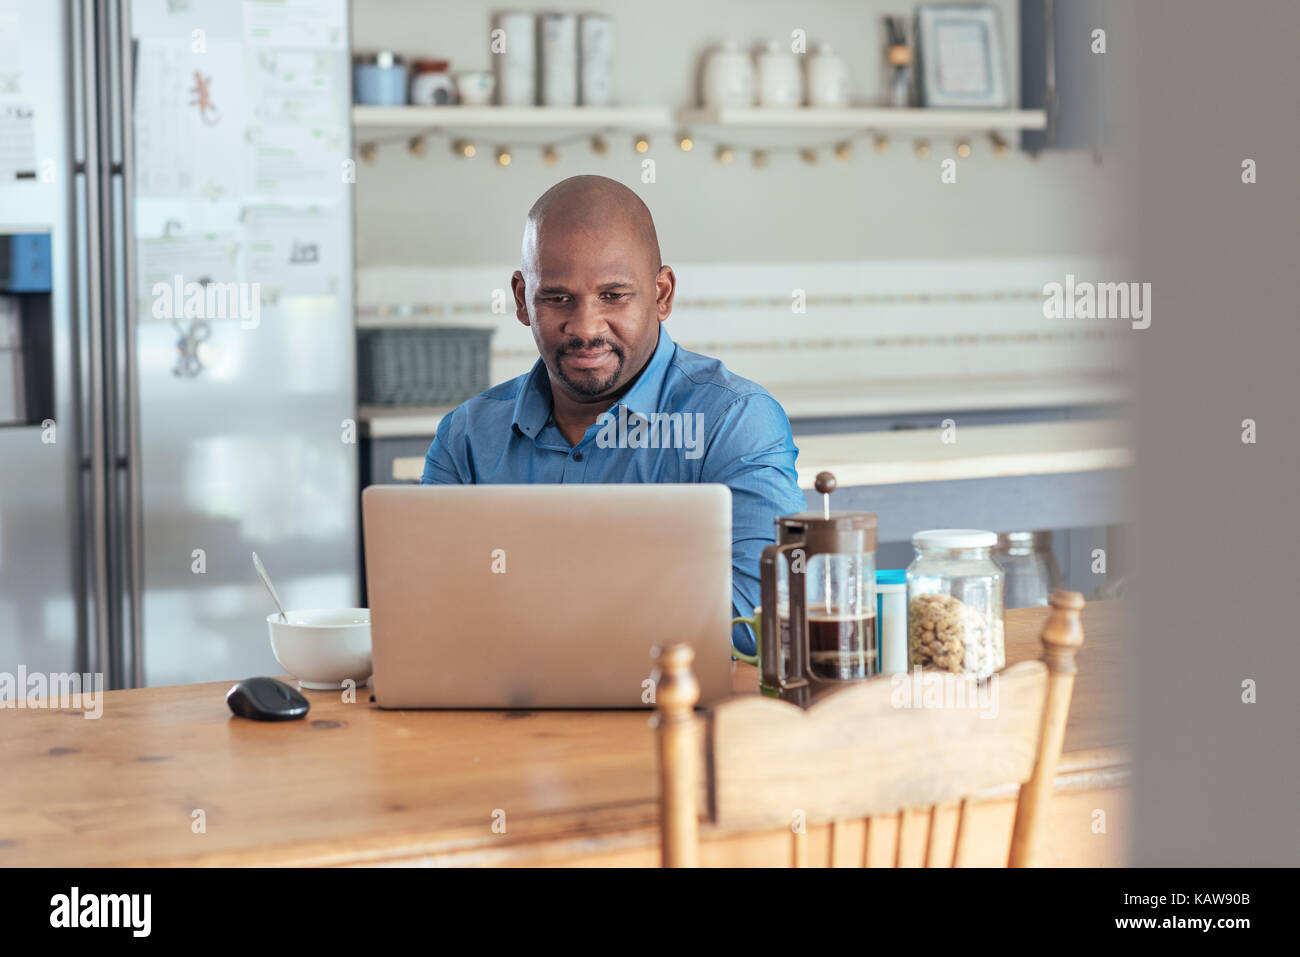 Smiling mature African man using a laptop over breakfast Stock Photo